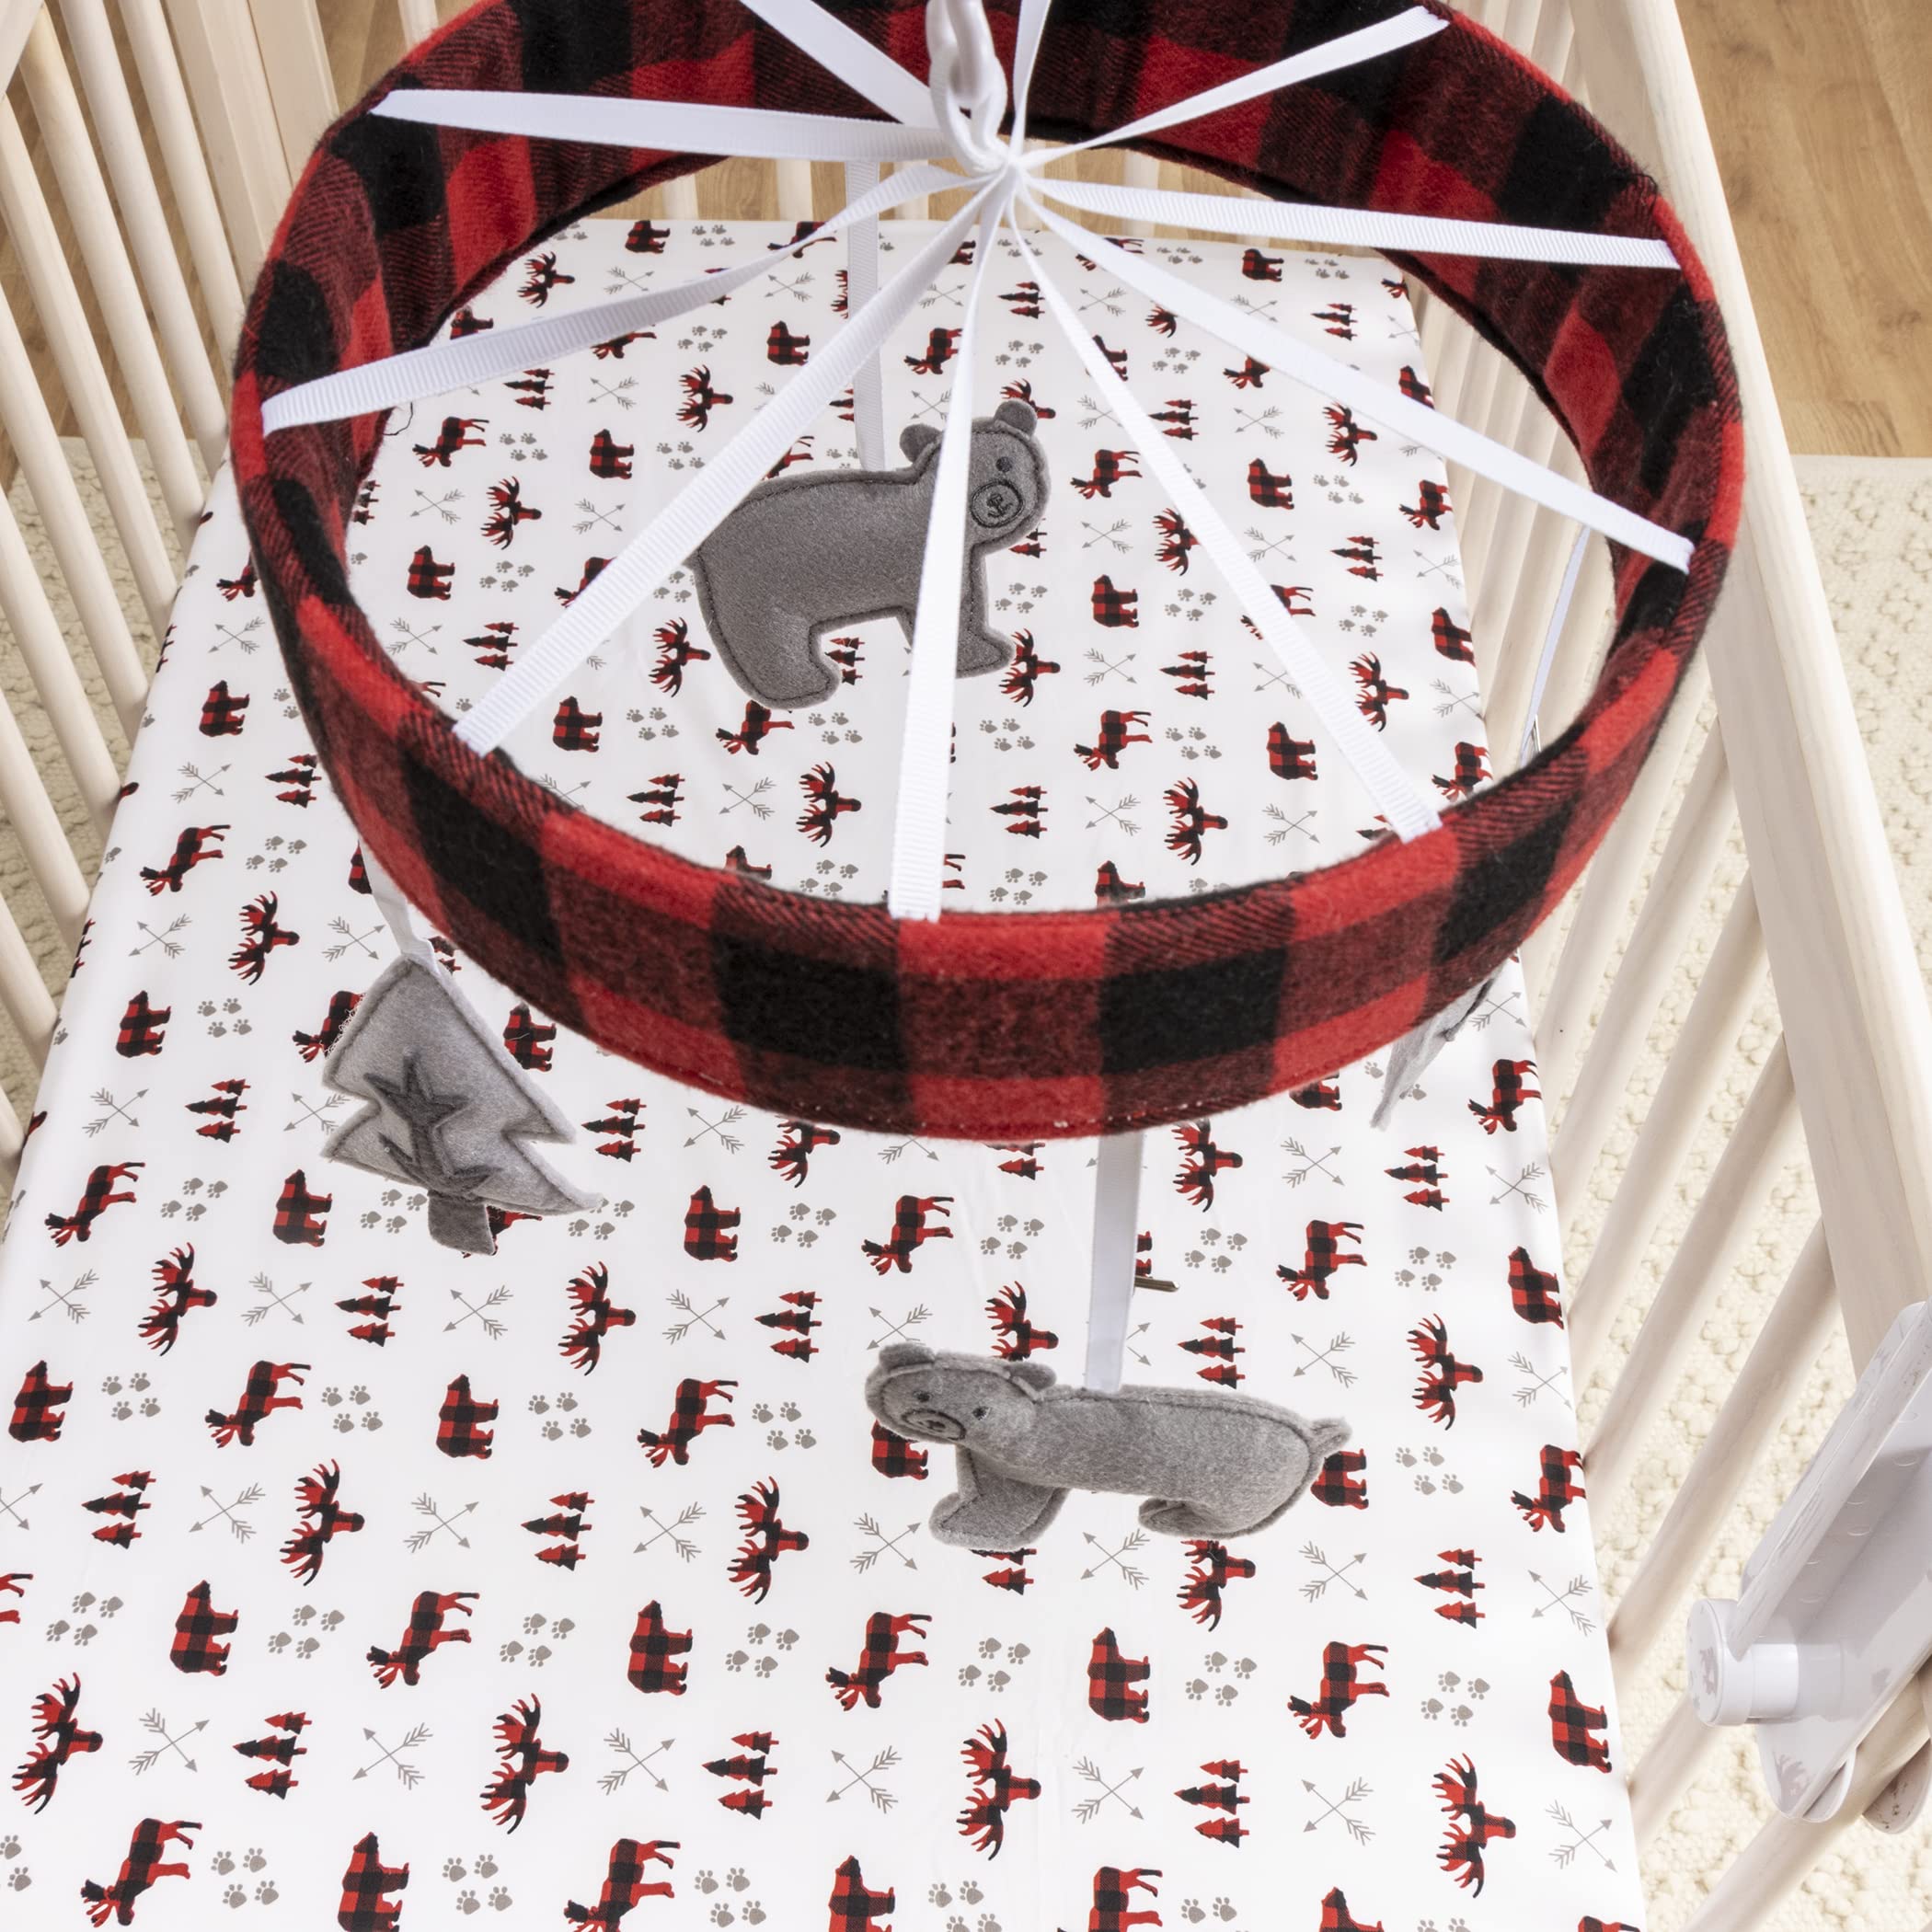 Sammy & Lou 2 Pack Microfiber Fitted Crib Sheets, Lumberjack,2 Count (Pack of 1)